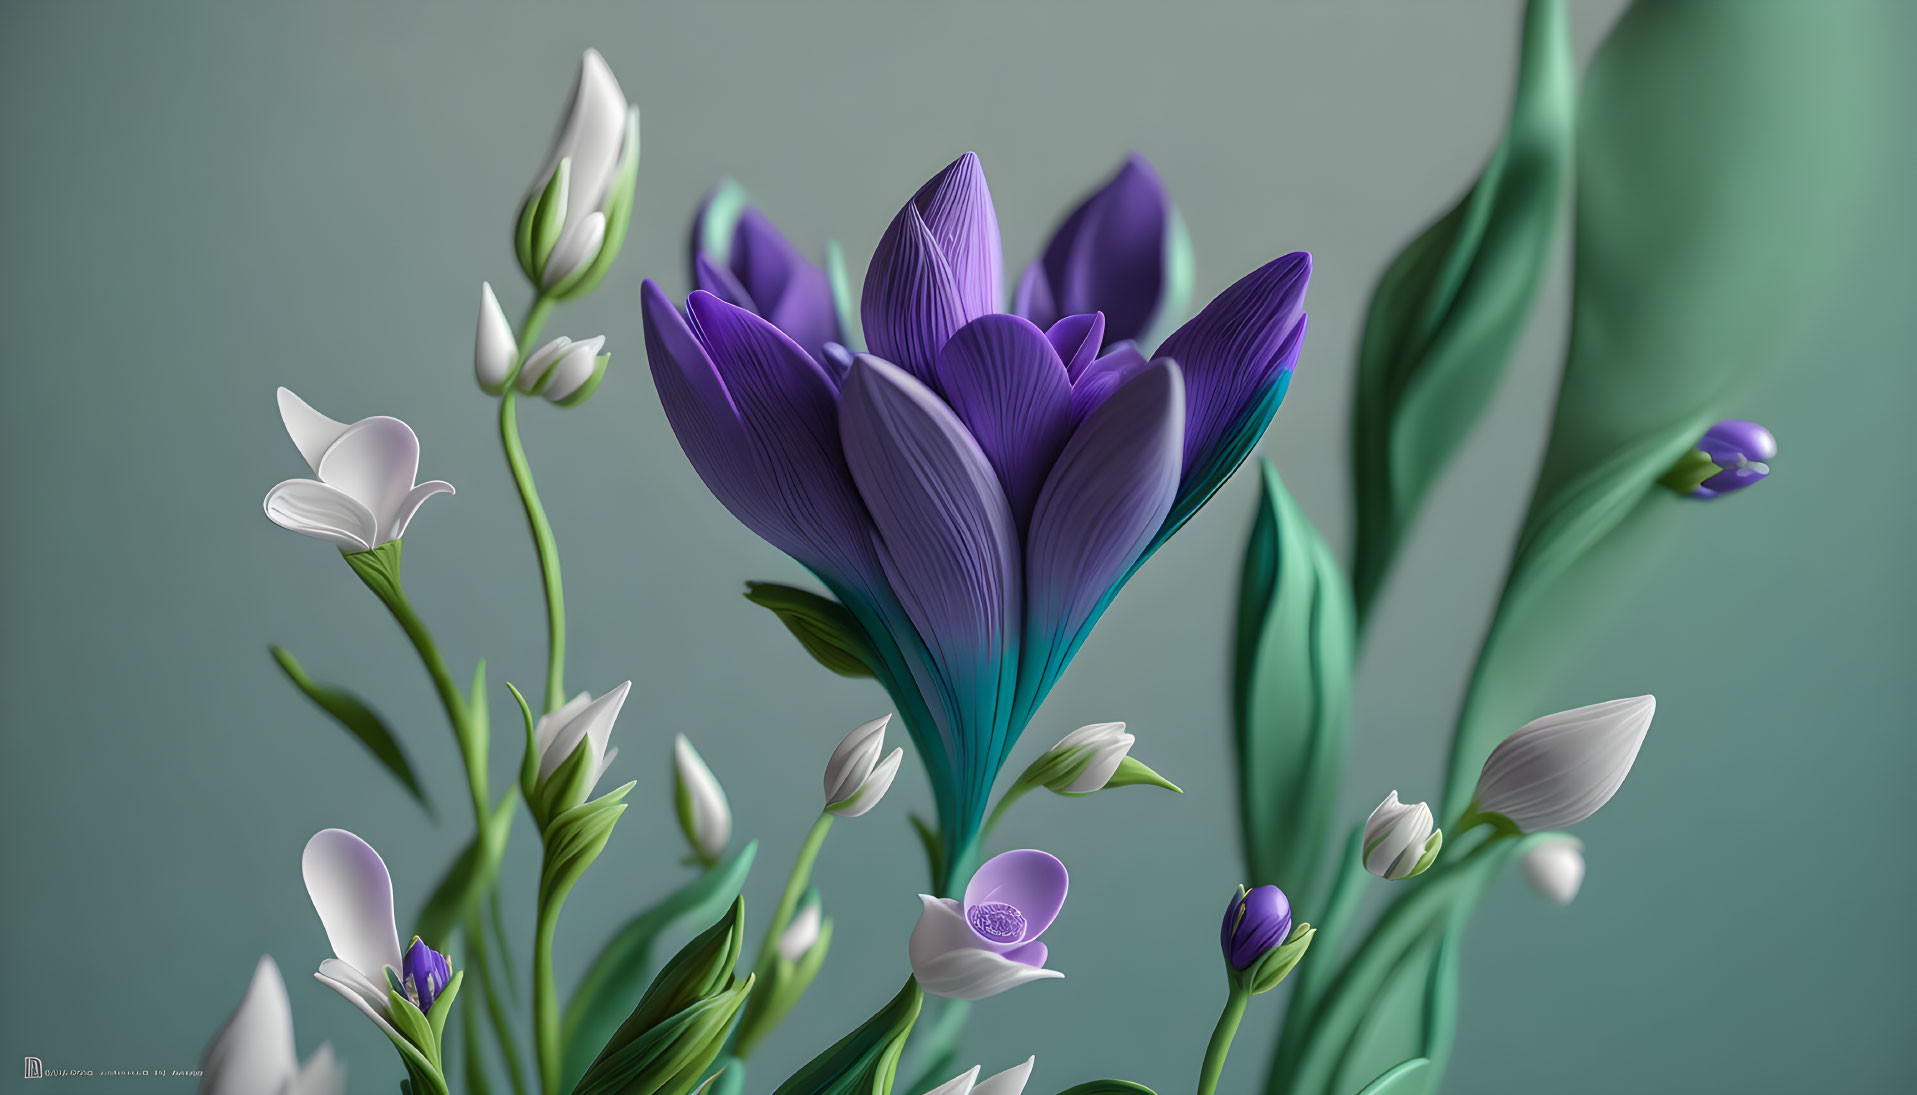 Purple and White Flowers with Prominent Veins on Soft Green Background